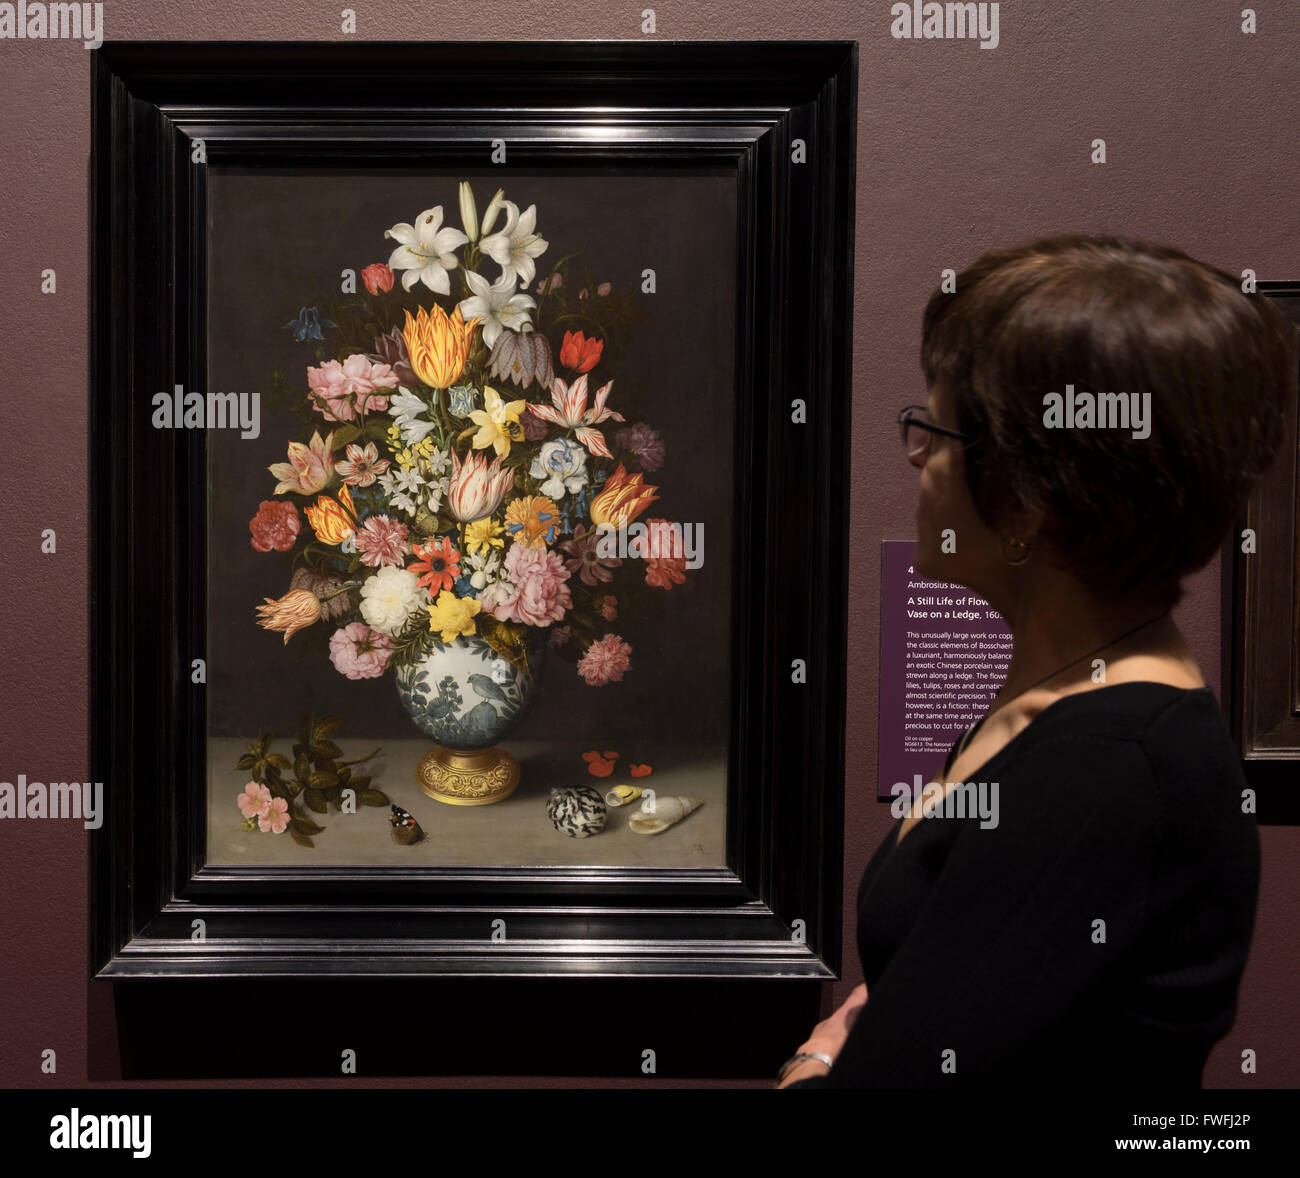 National Gallery, London, UK. 5th April, 2016. Betsy Wiseman, Curator of Dutch and Flemish Paintings, examines A Still Life of Flowers in a Wan-Li Vase on a Ledge by Ambrosius Bosschaert the Elder. Coinciding with the Chelsea Flower Show, this exhibition explores Dutch flower painting from the 17th to the late 18th century. Credit:  artsimages/Alamy Live News Stock Photo